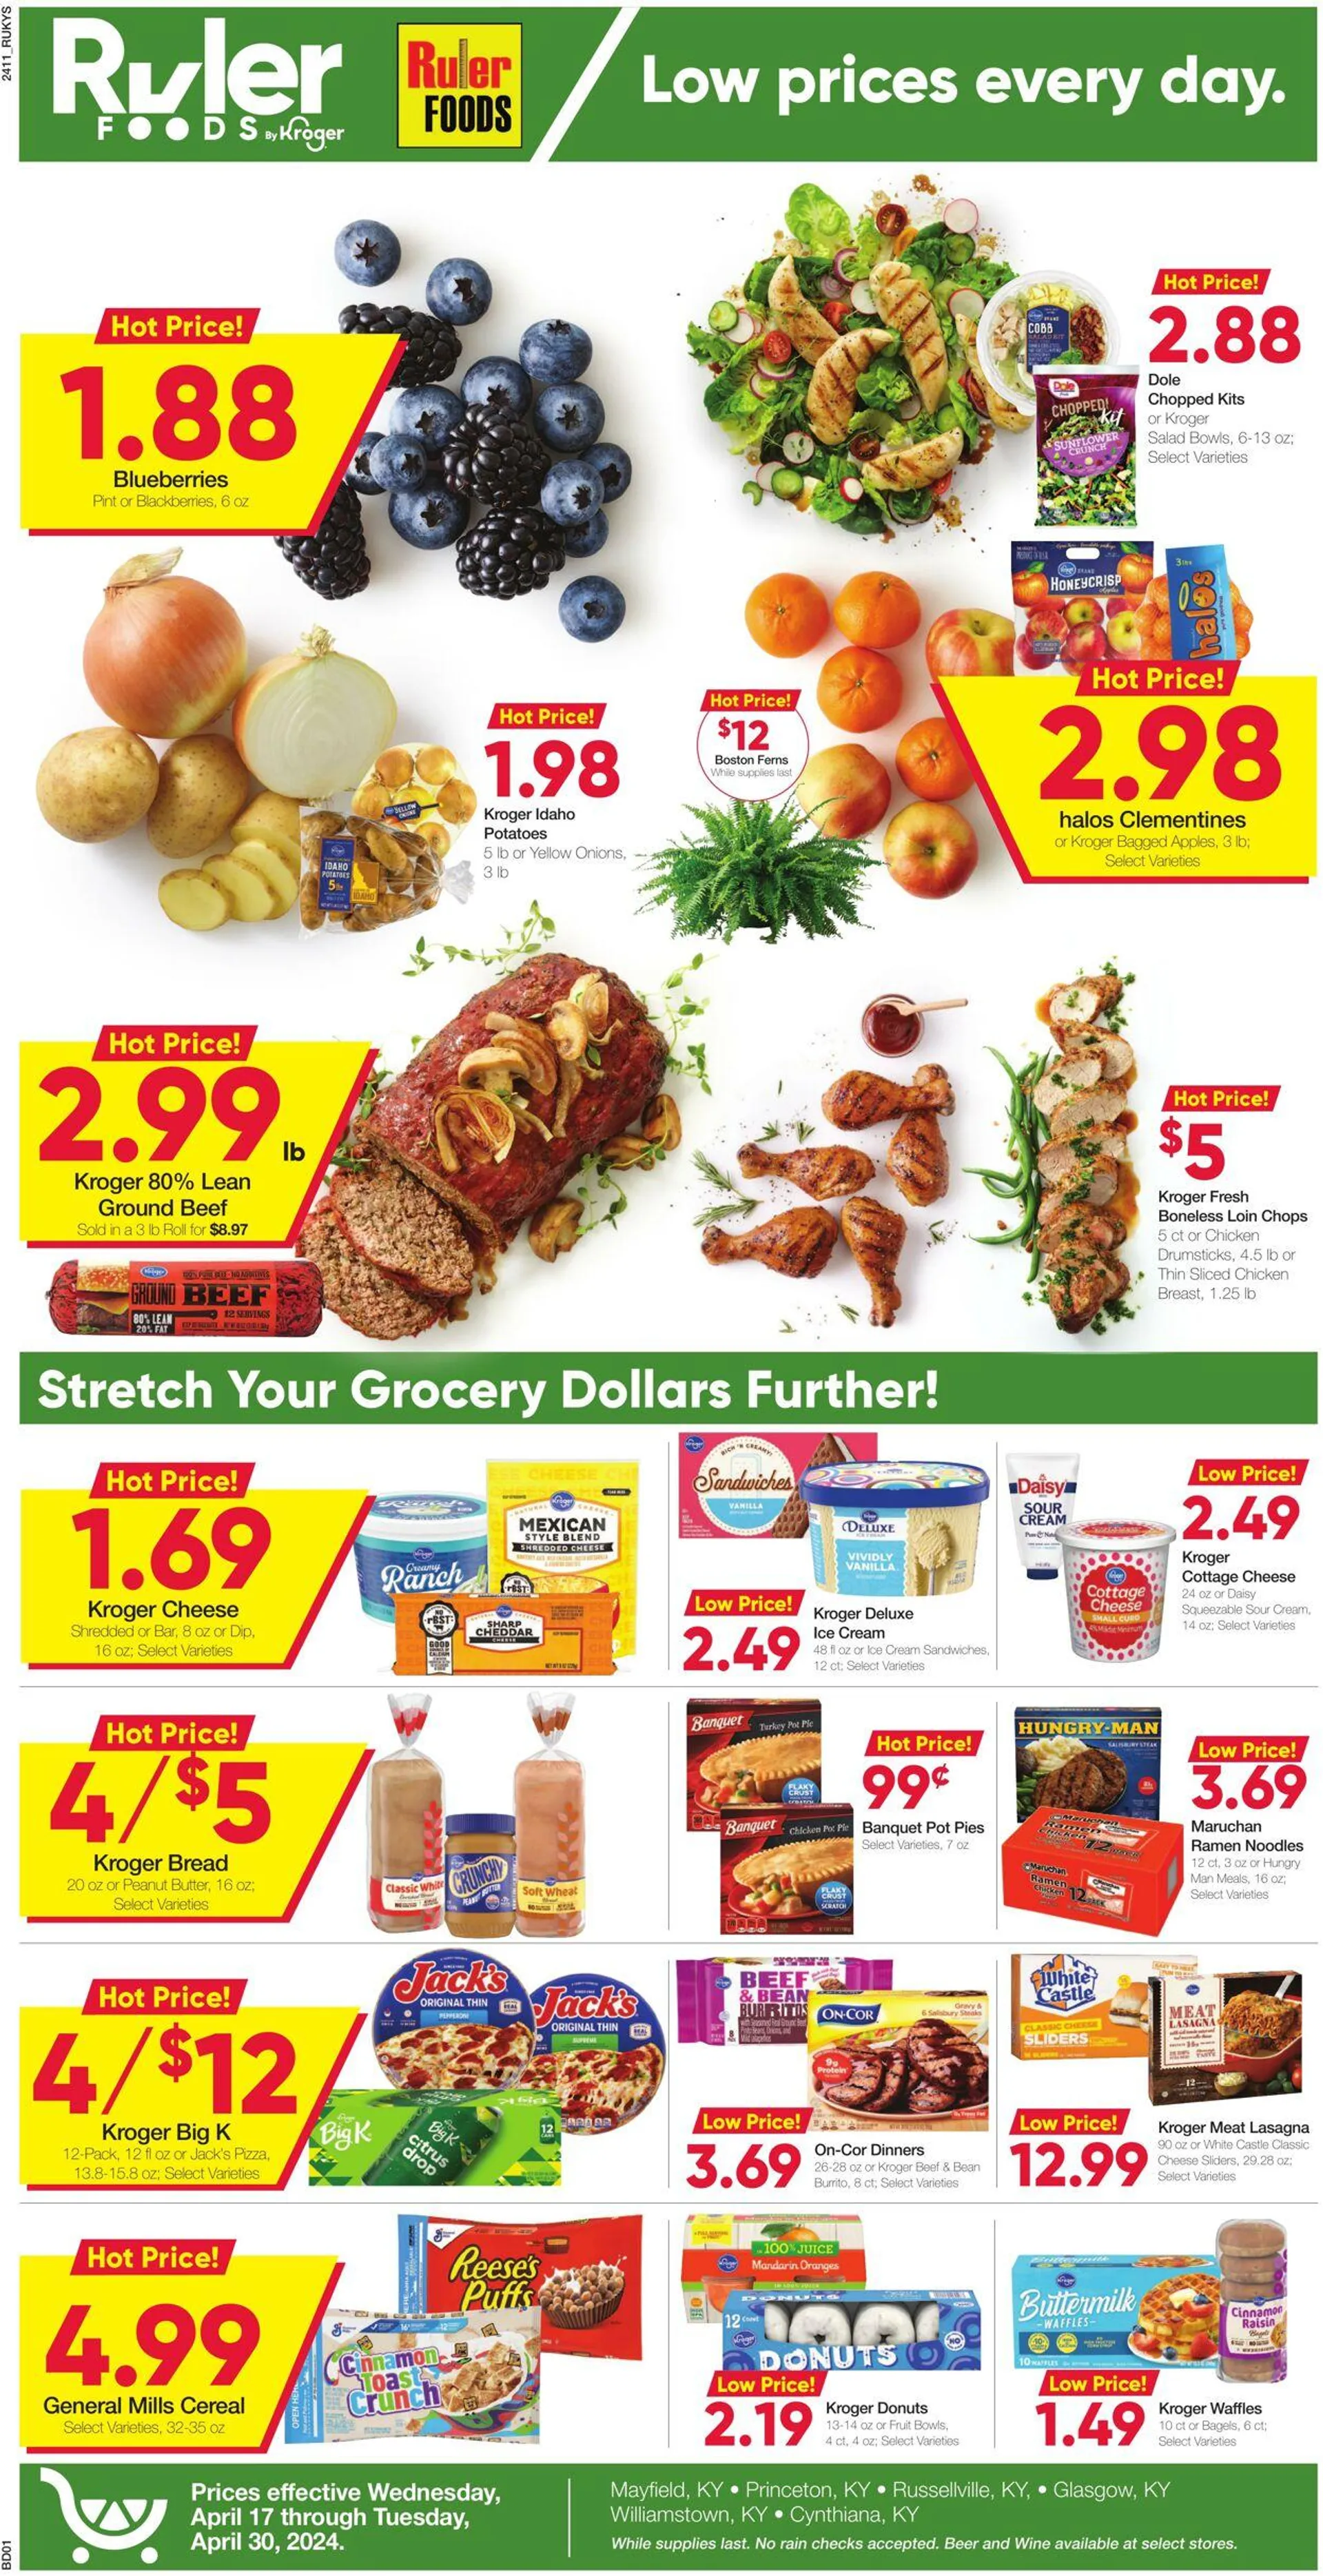 Ruler Foods Current weekly ad - 1